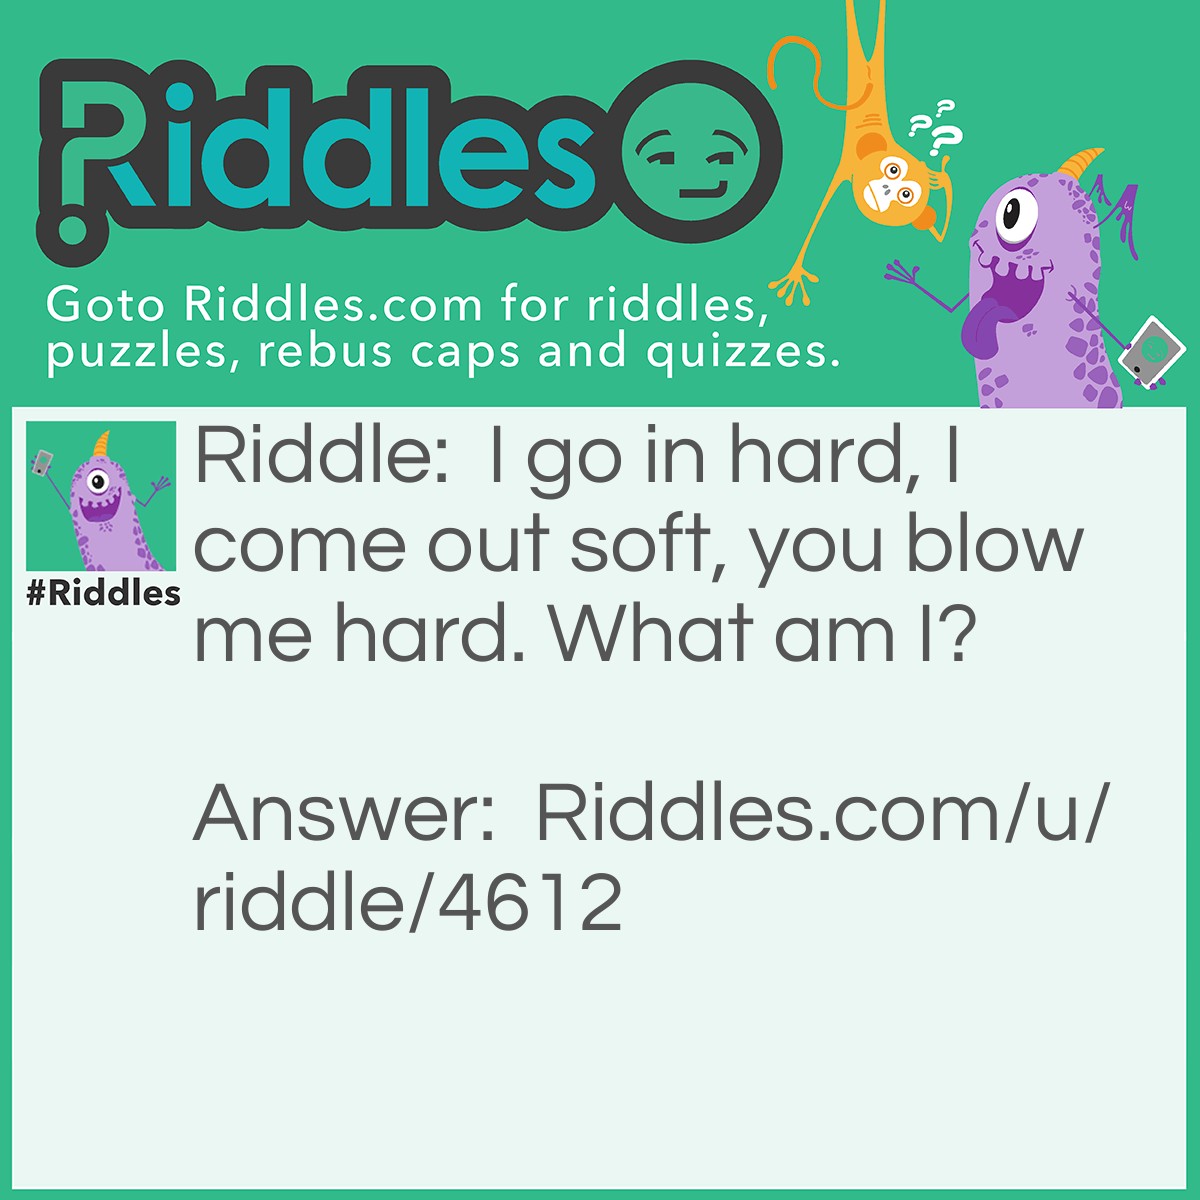 Riddle: I go in hard, I come out soft, you blow me hard. What am I? Answer: Gum.